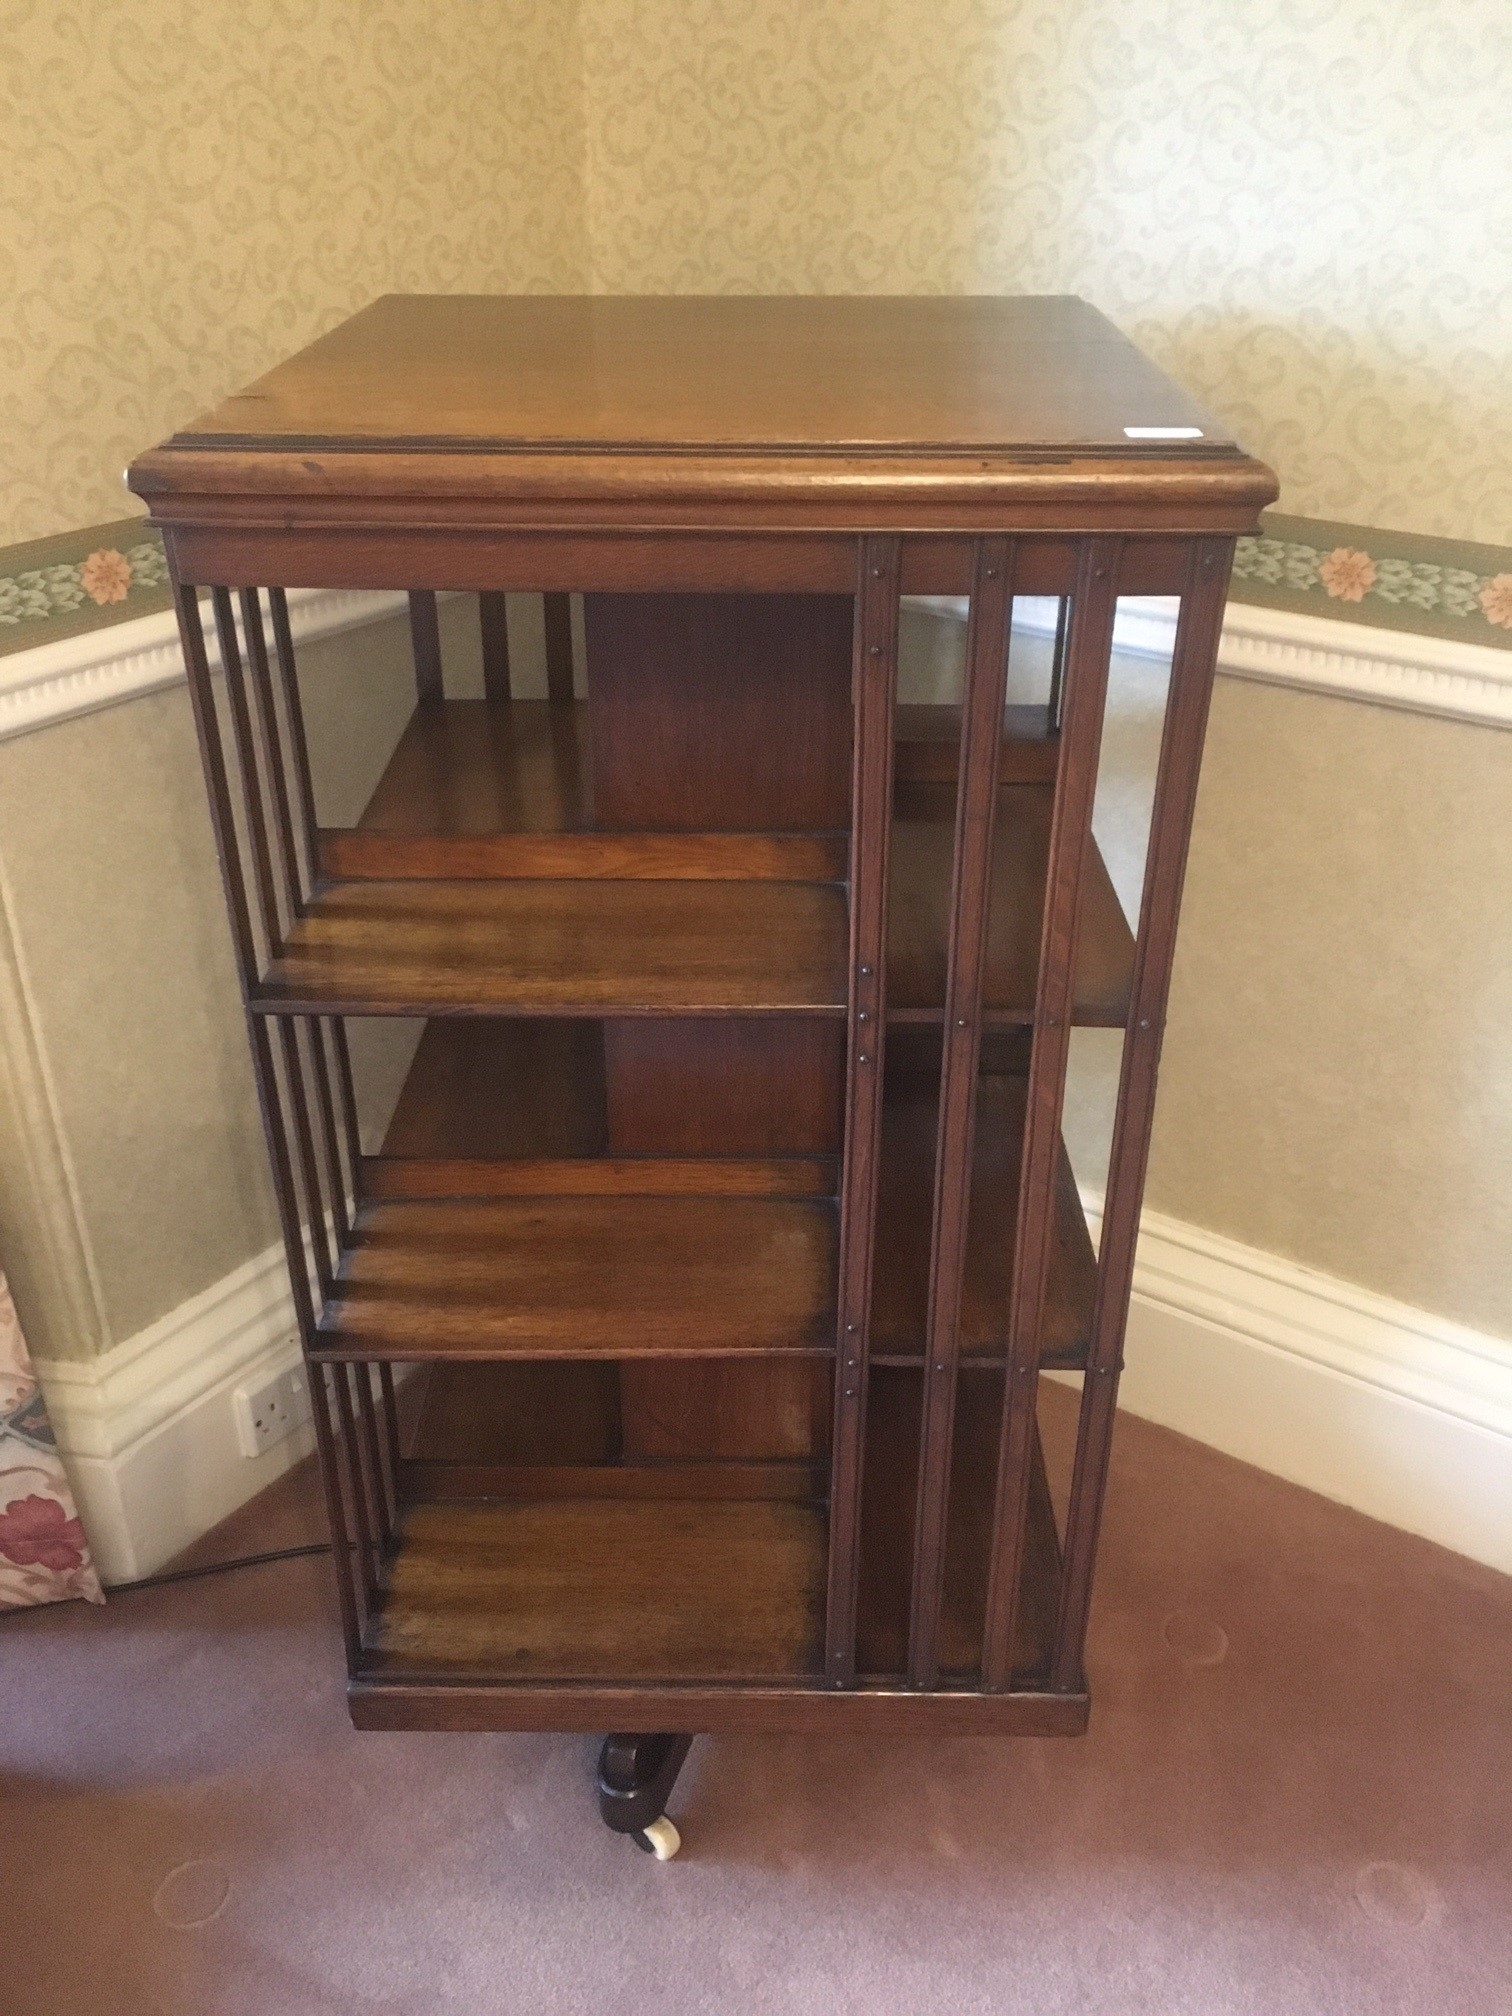 Early 20th century oak revolving bookcase of typical form, 114cm tall.